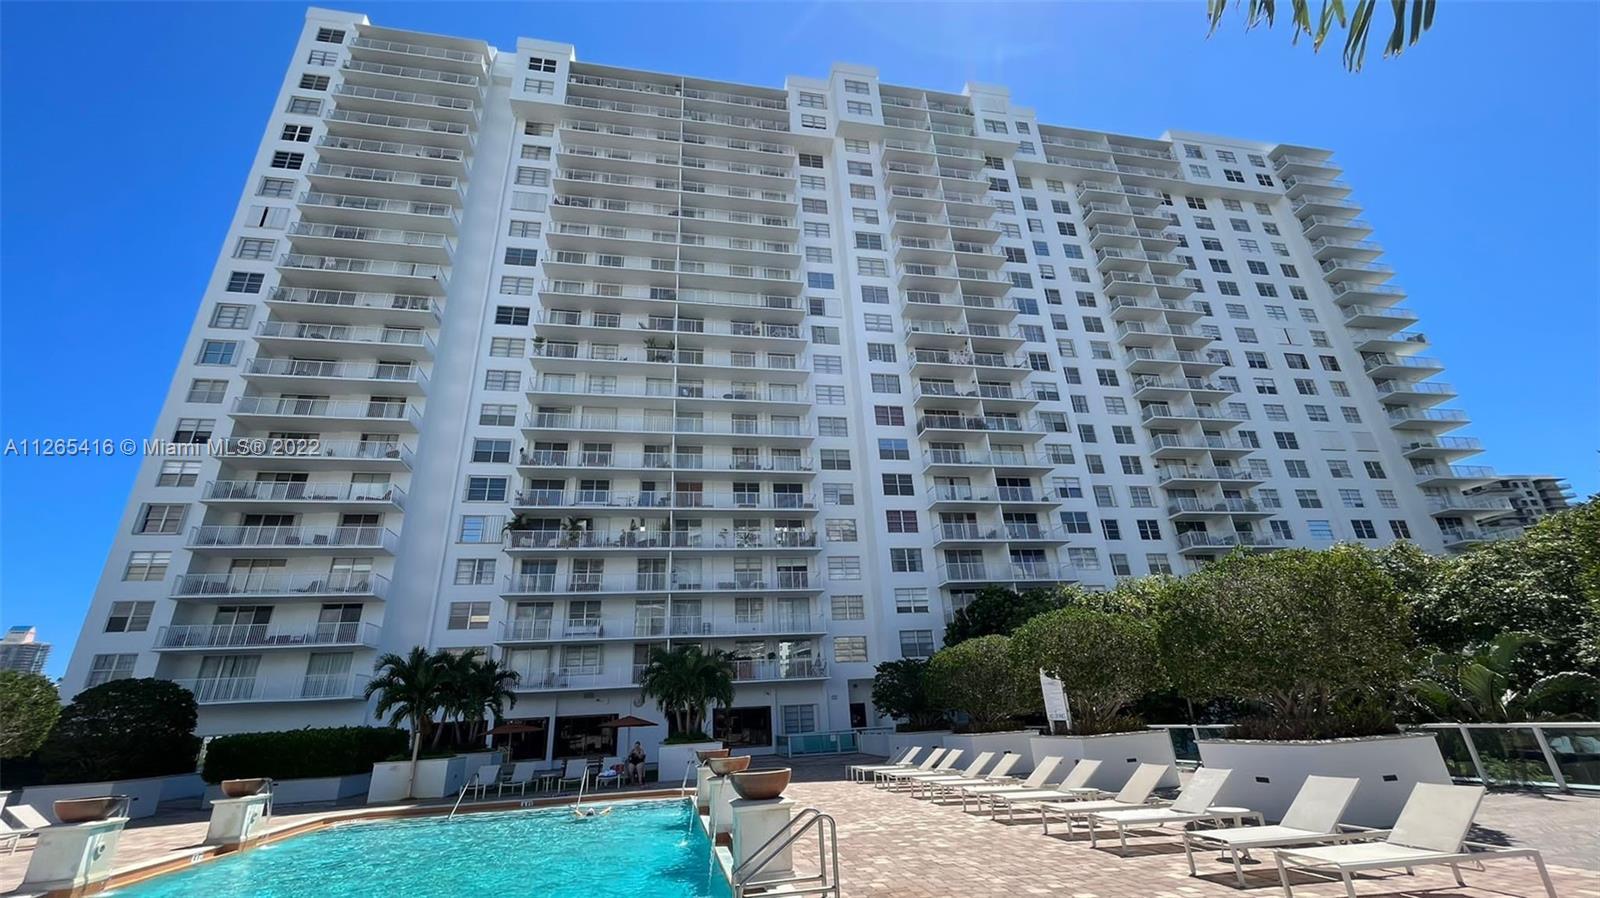 AMAZING 2 BEDS, 2 BATHS PLUS DEN APARTMENT LOCATED IN THE HEART OF AVENTURA. WRAP- AROUND BALCONY TO